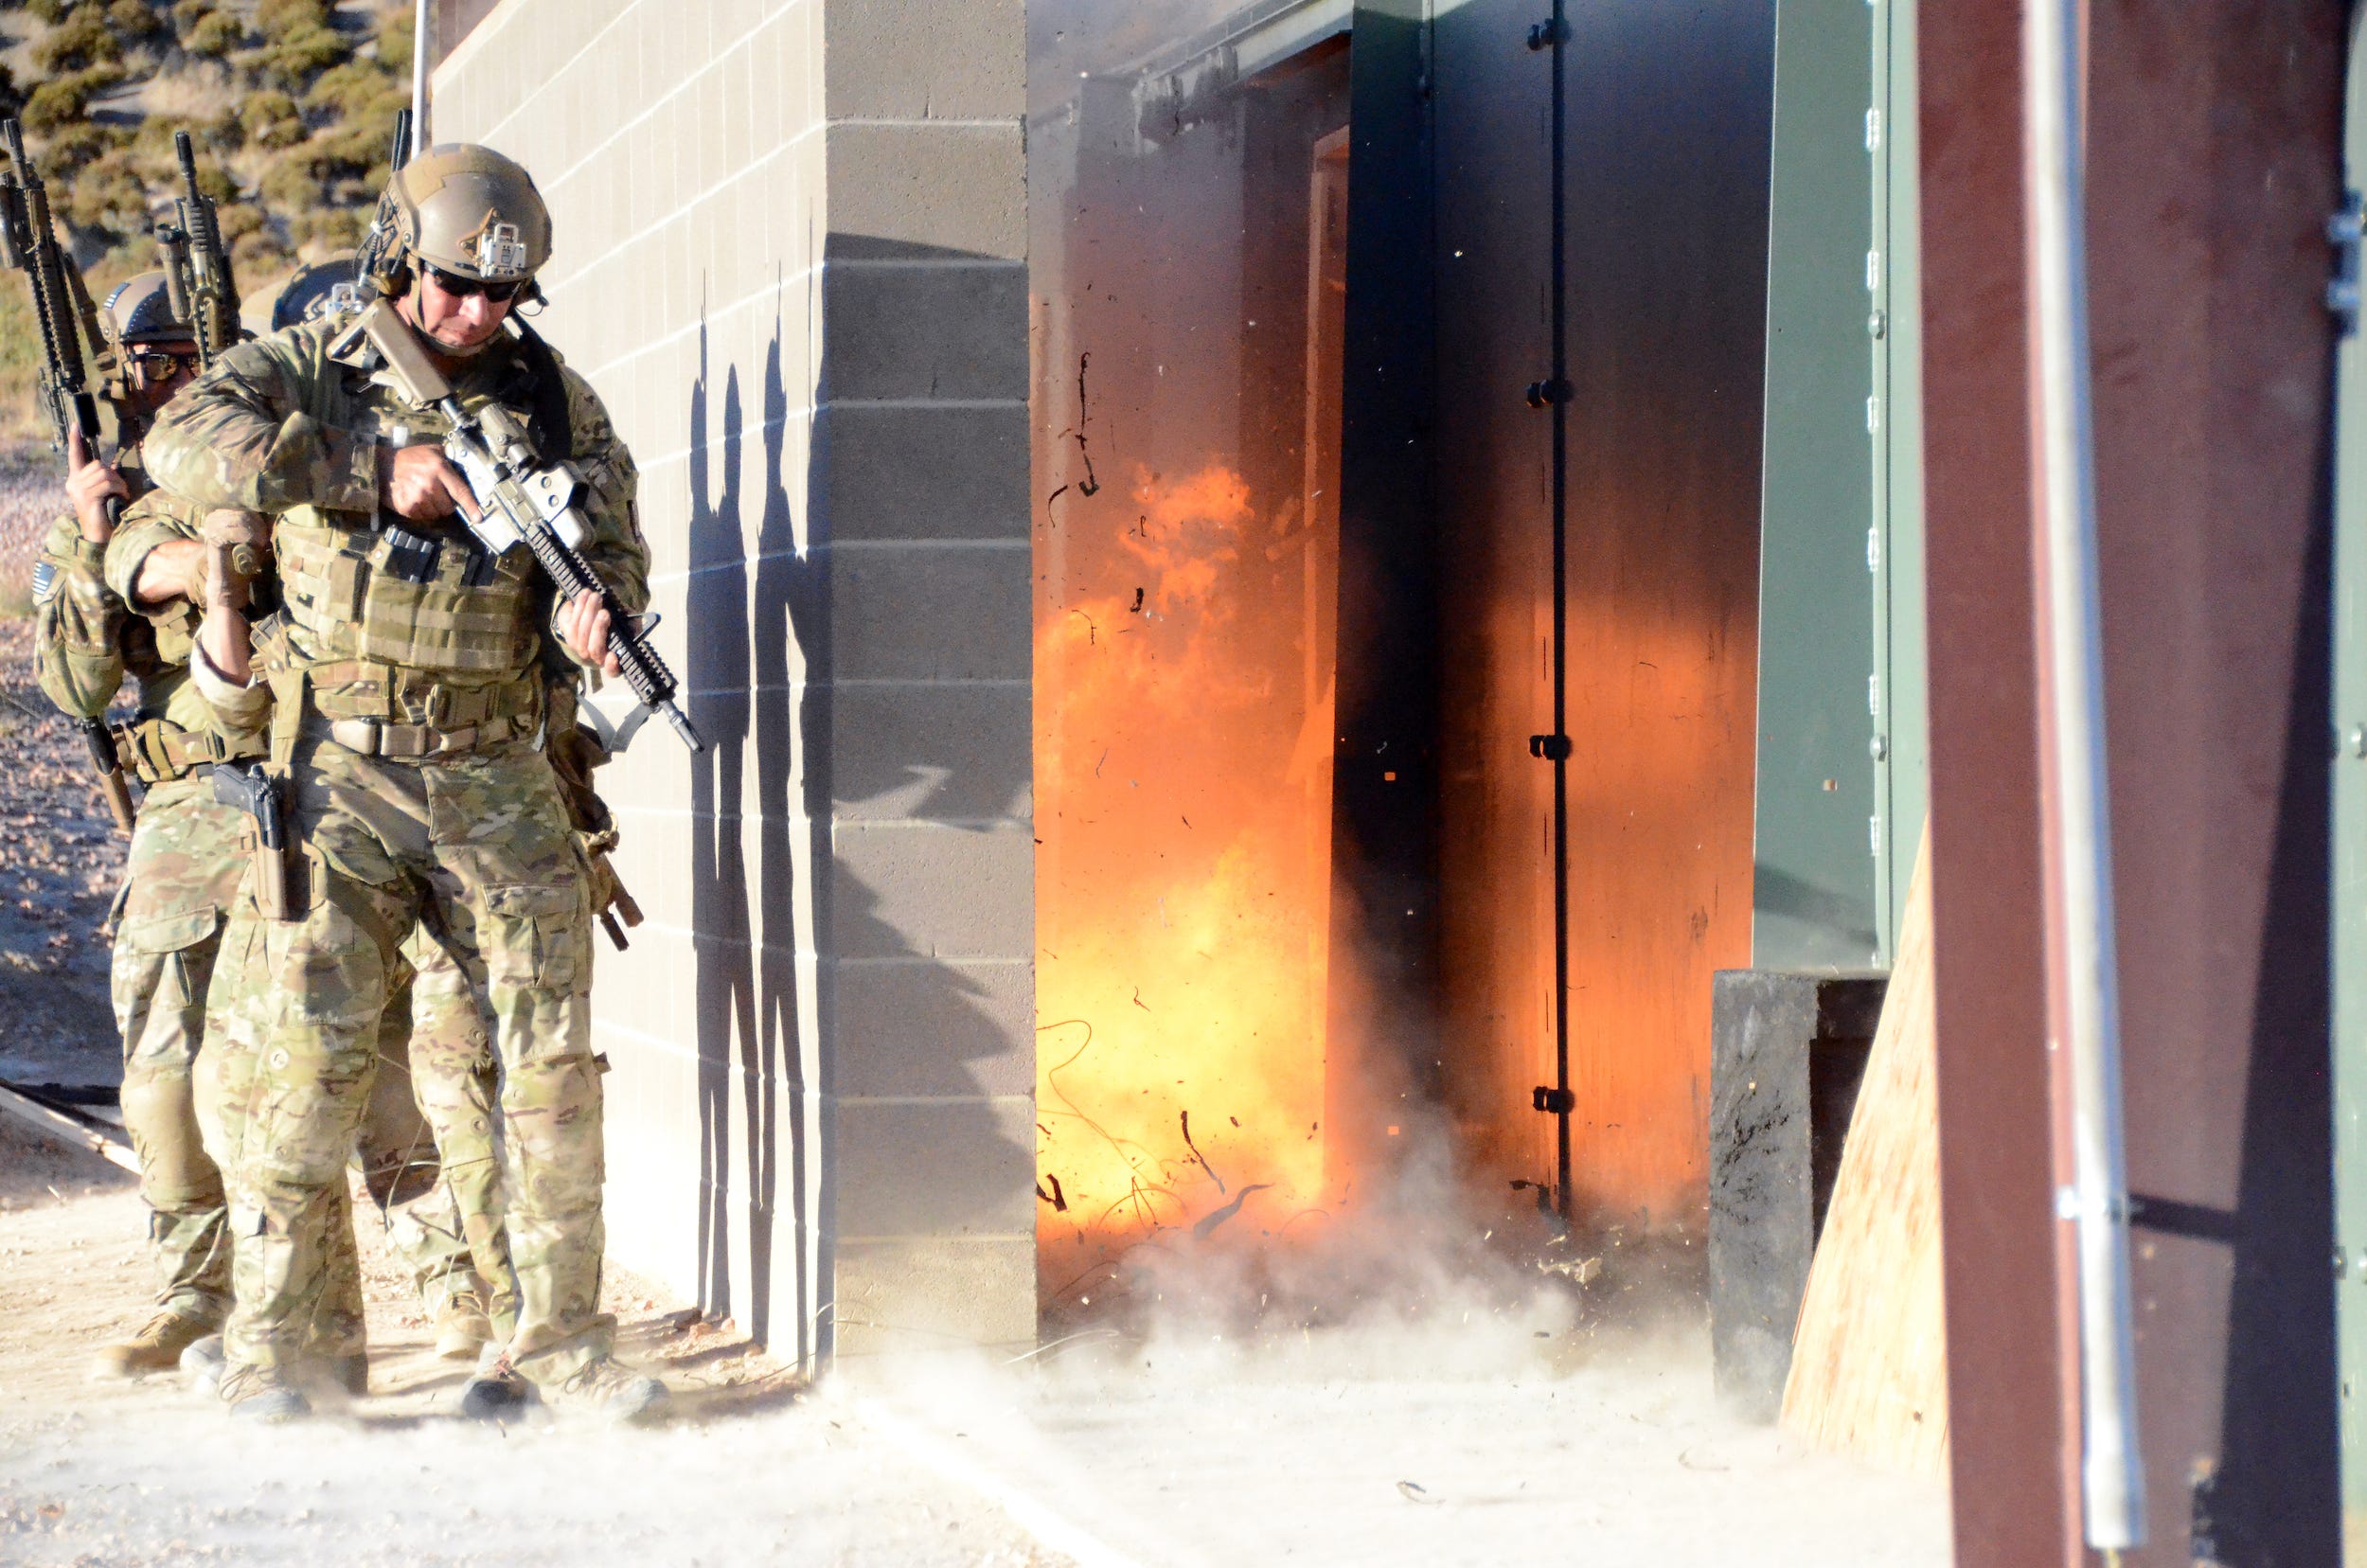 Army Special Forces door breaching